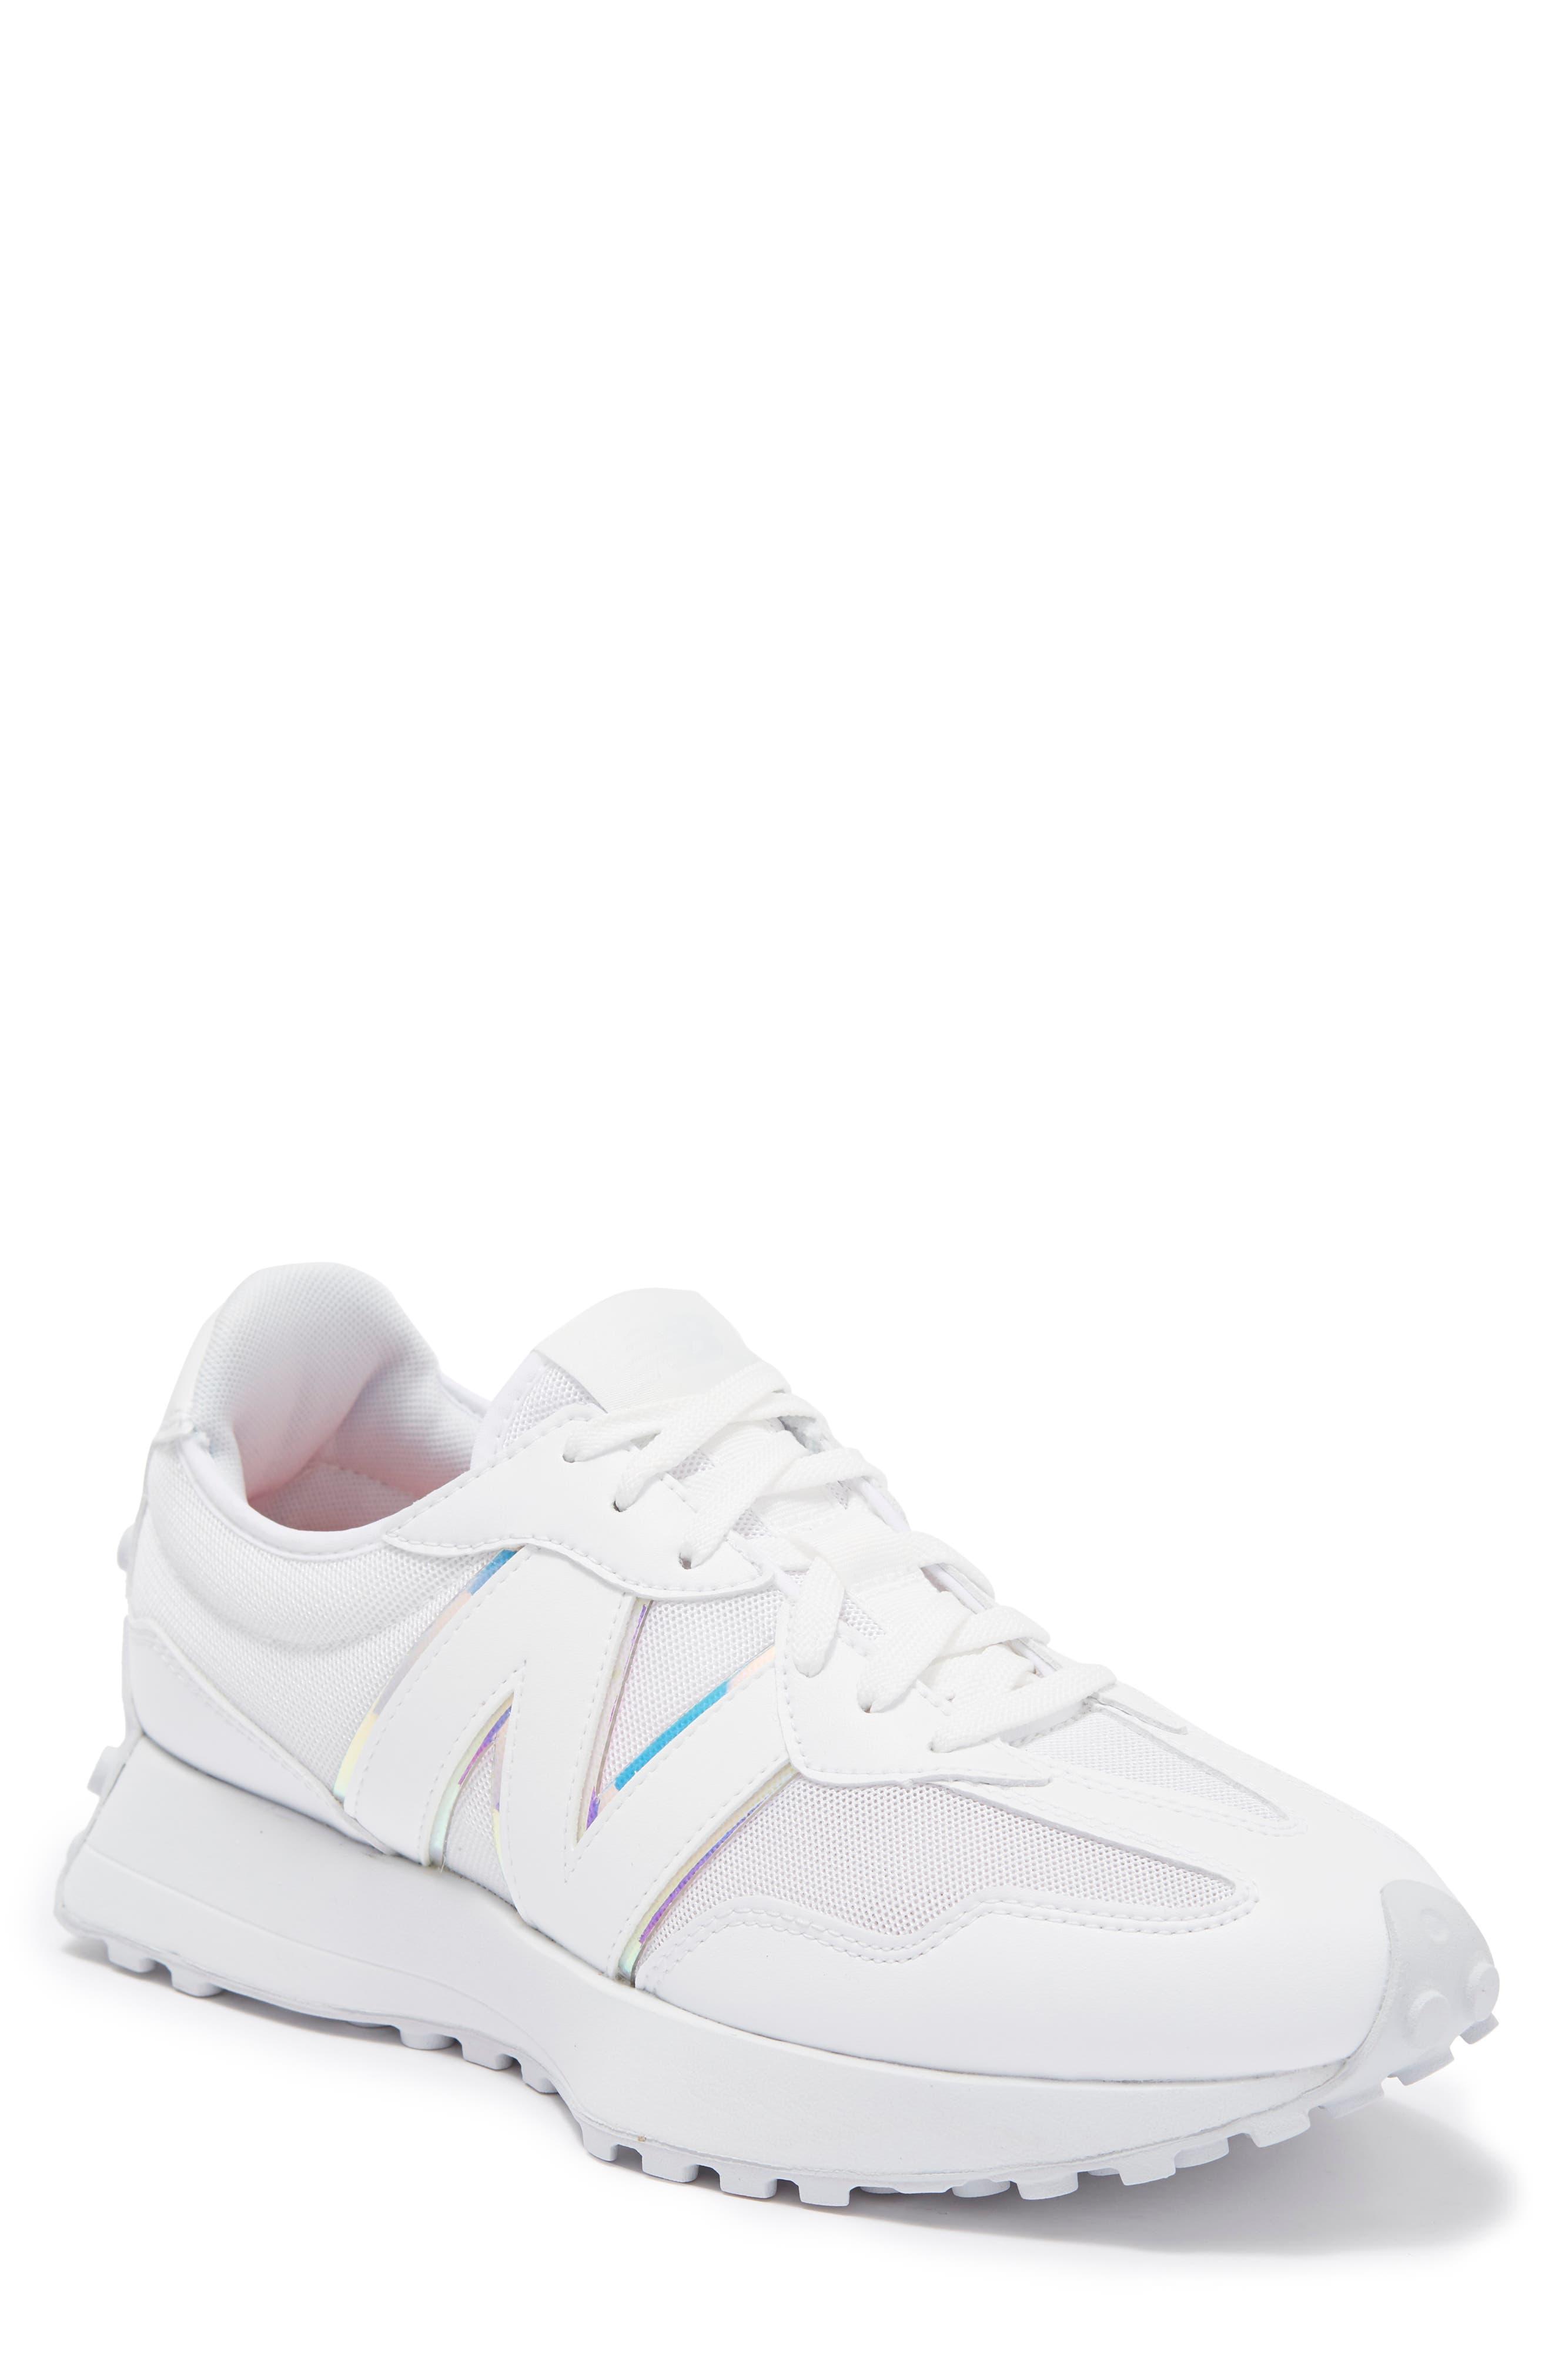 New Balance Gender Inclusive 327 Sneaker in White | Lyst